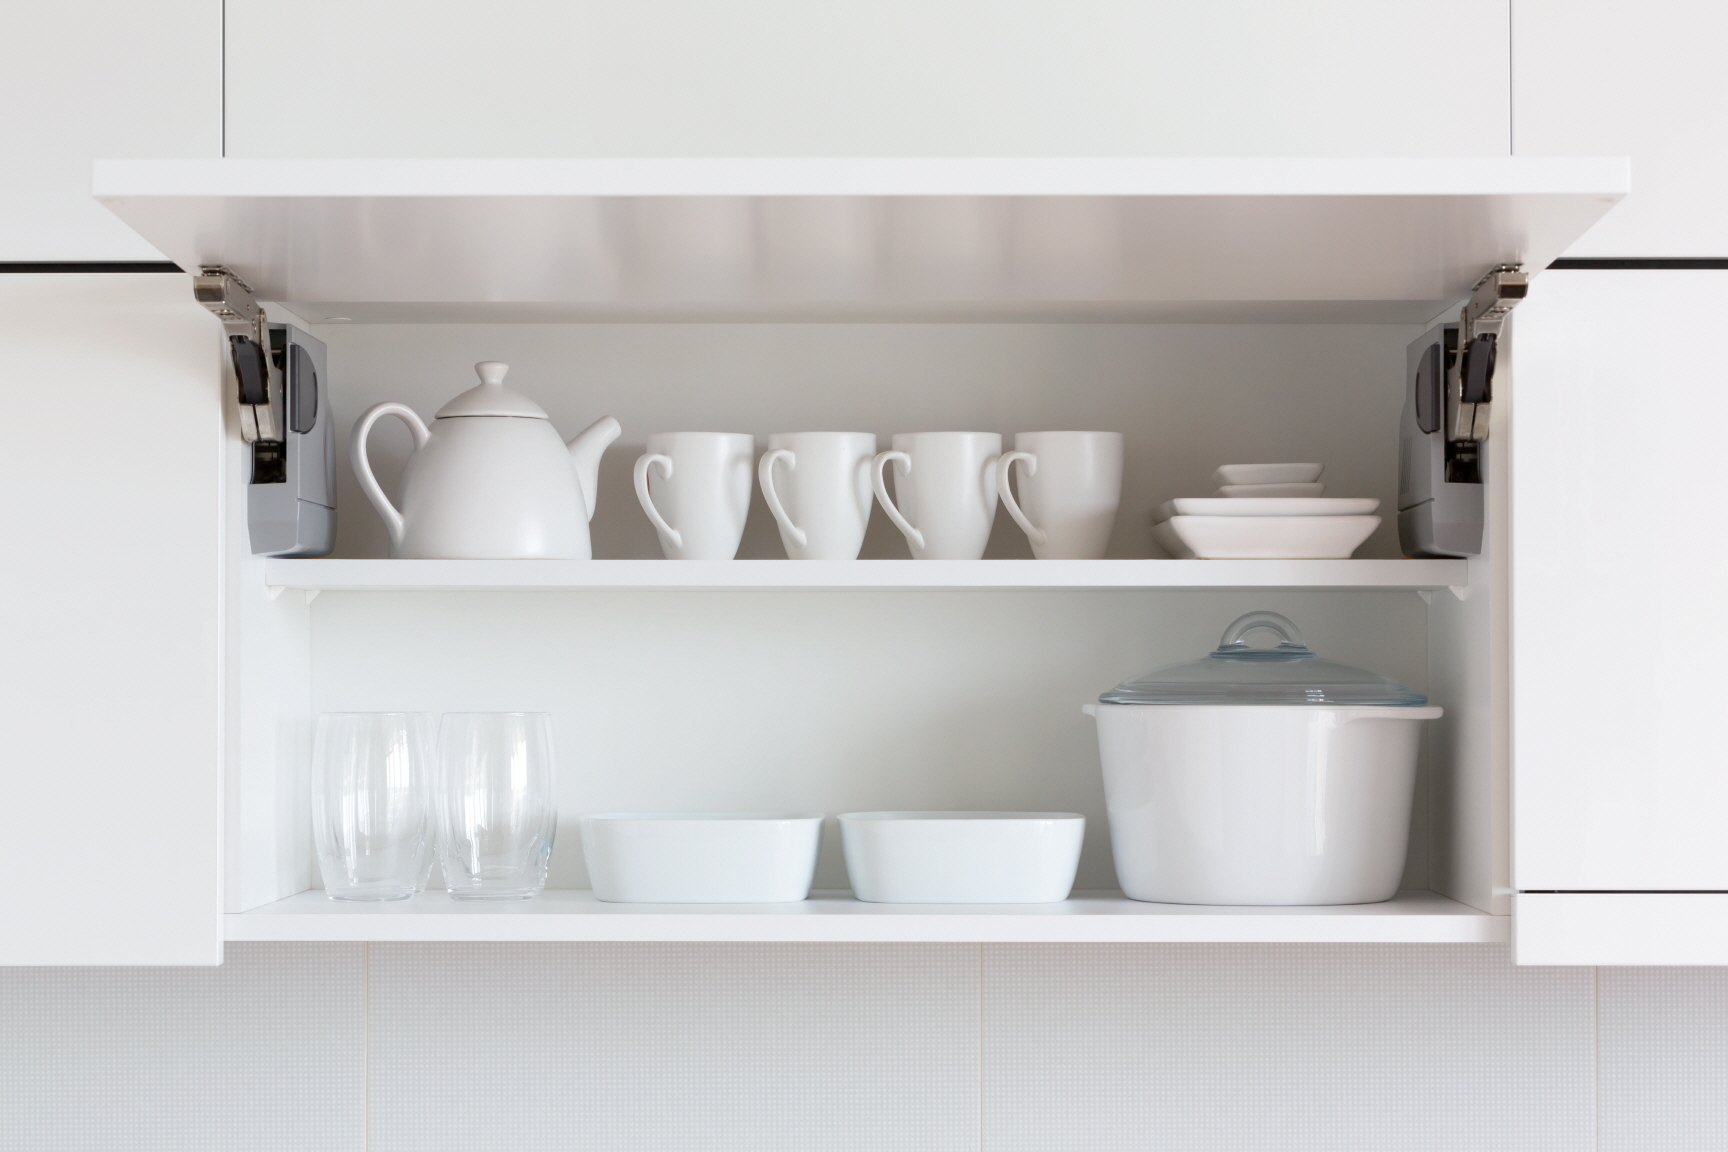 LX Hausys's storage solutions create an organized kitchen oasis with efficiency and durability.